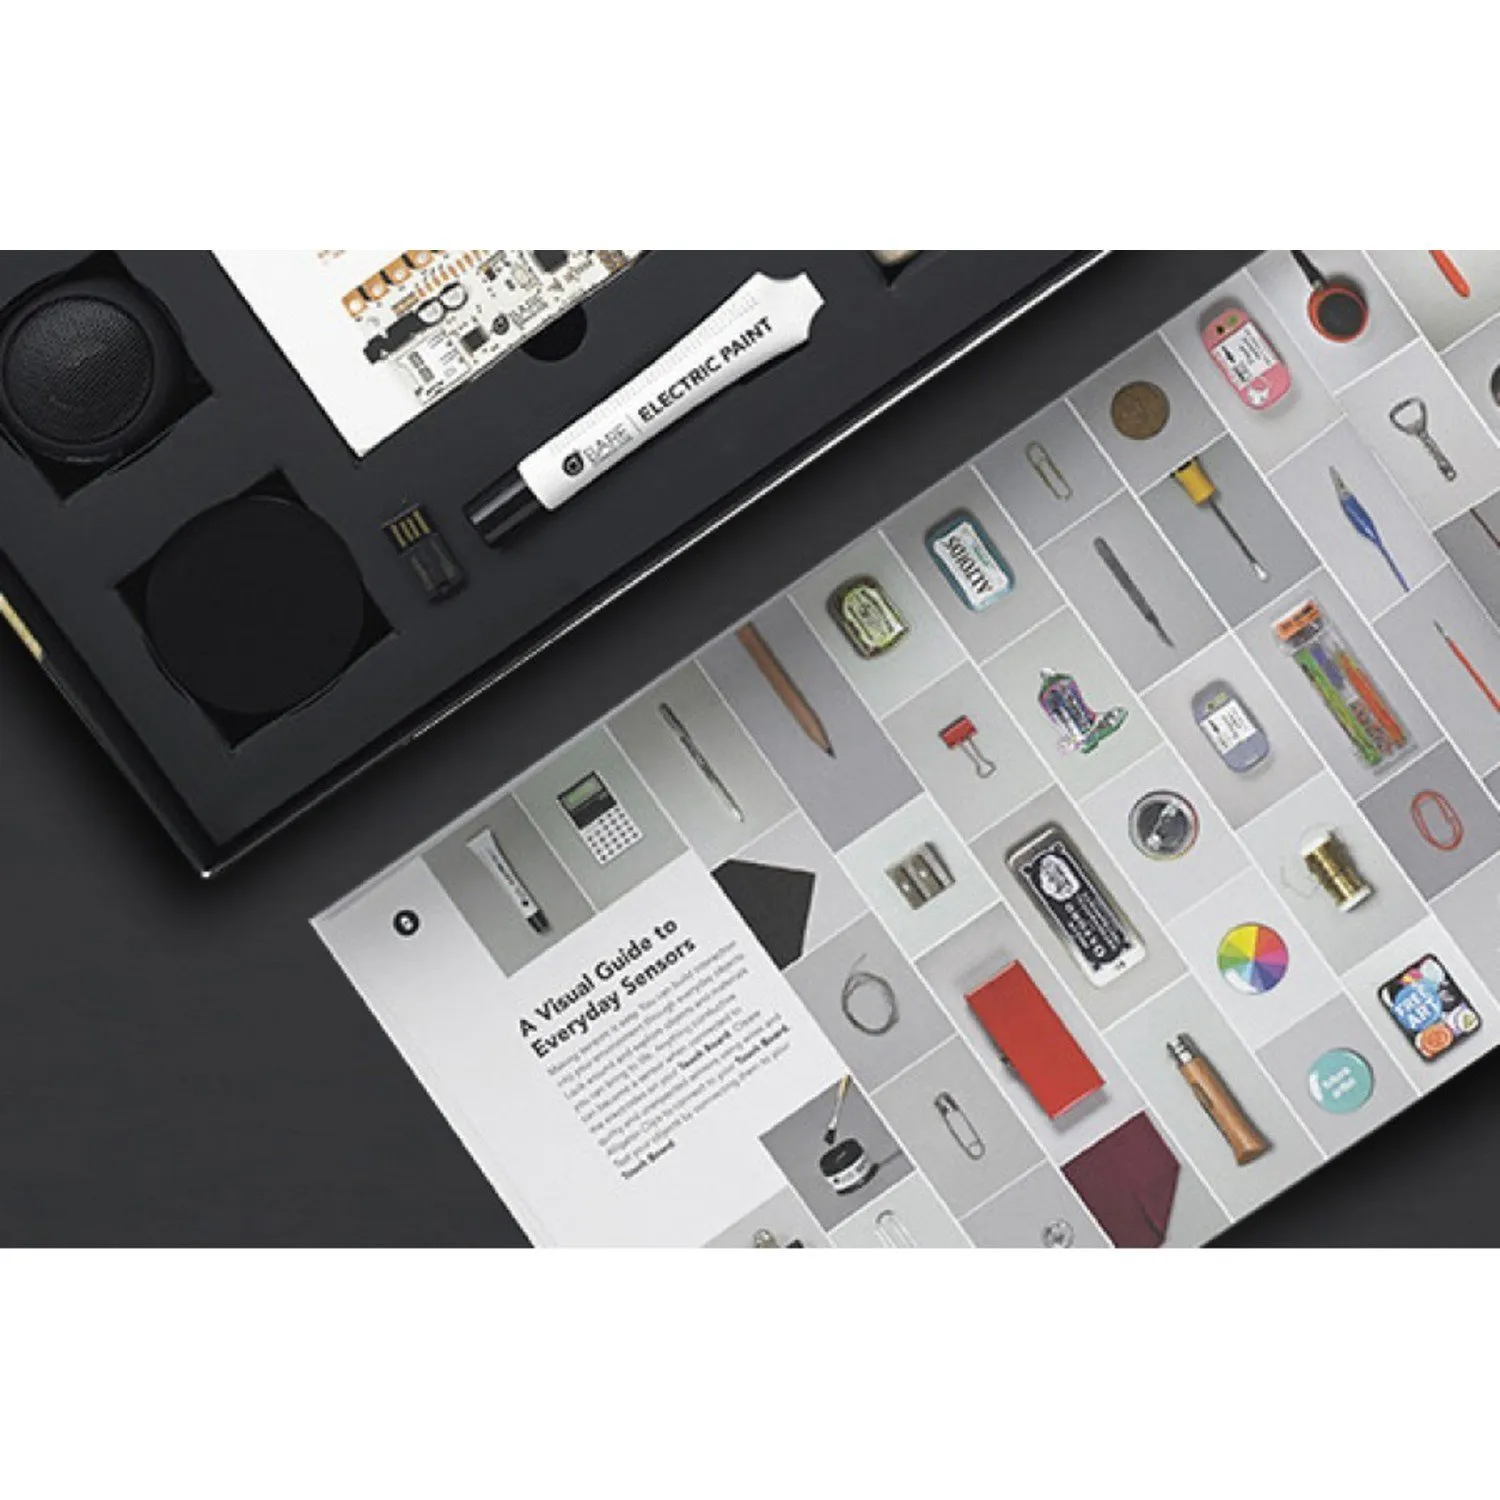 Photo of Bare Conductive Touch Board Starter Kit